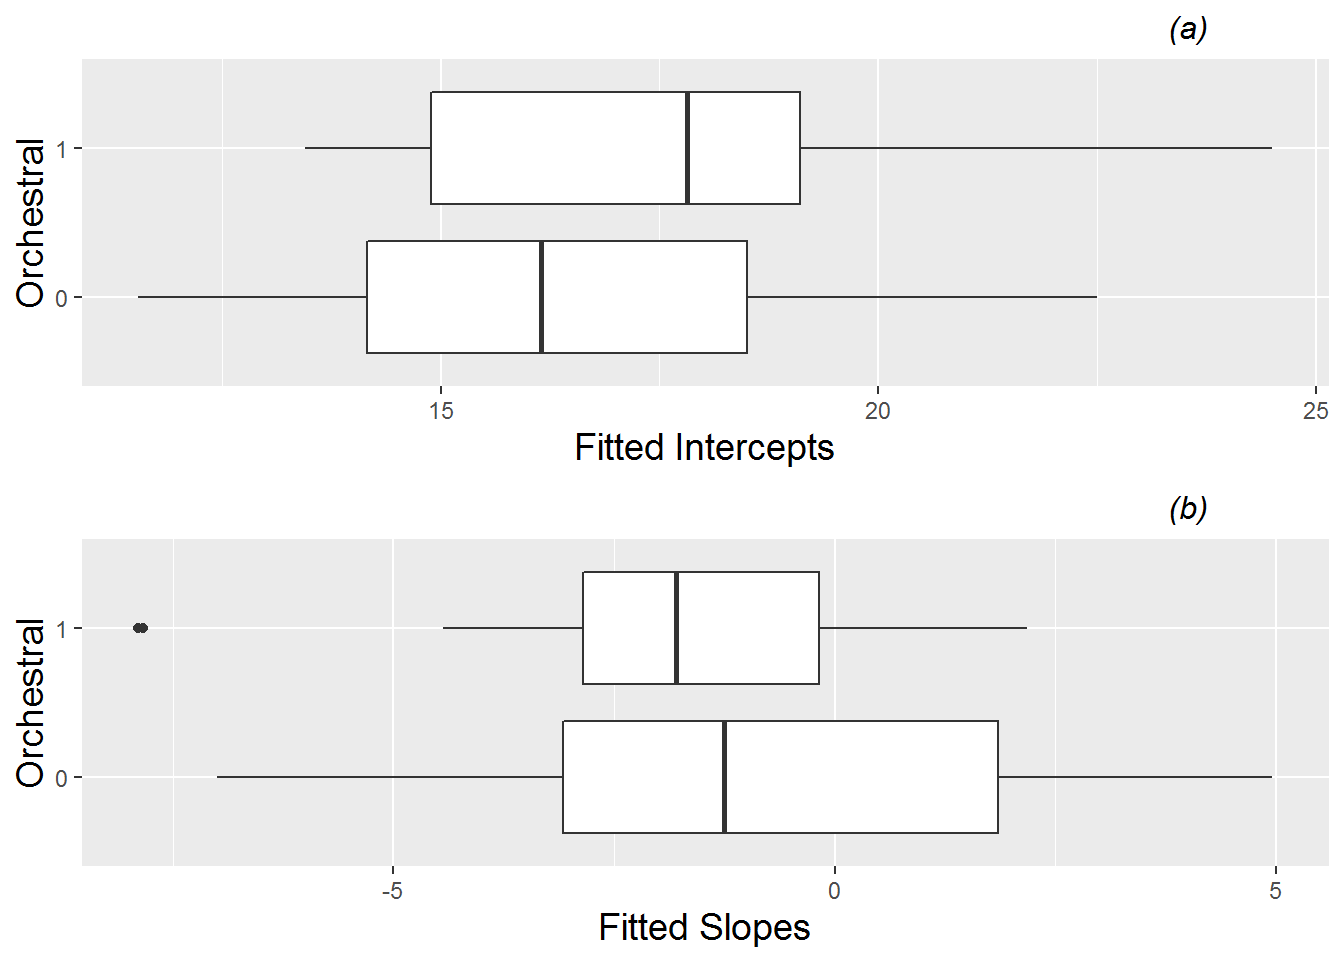 Boxplots of fitted intercepts (plot (a)) and slopes (plot (b)) by orchestral instrument (1) vs. keyboard or vocalist (0).